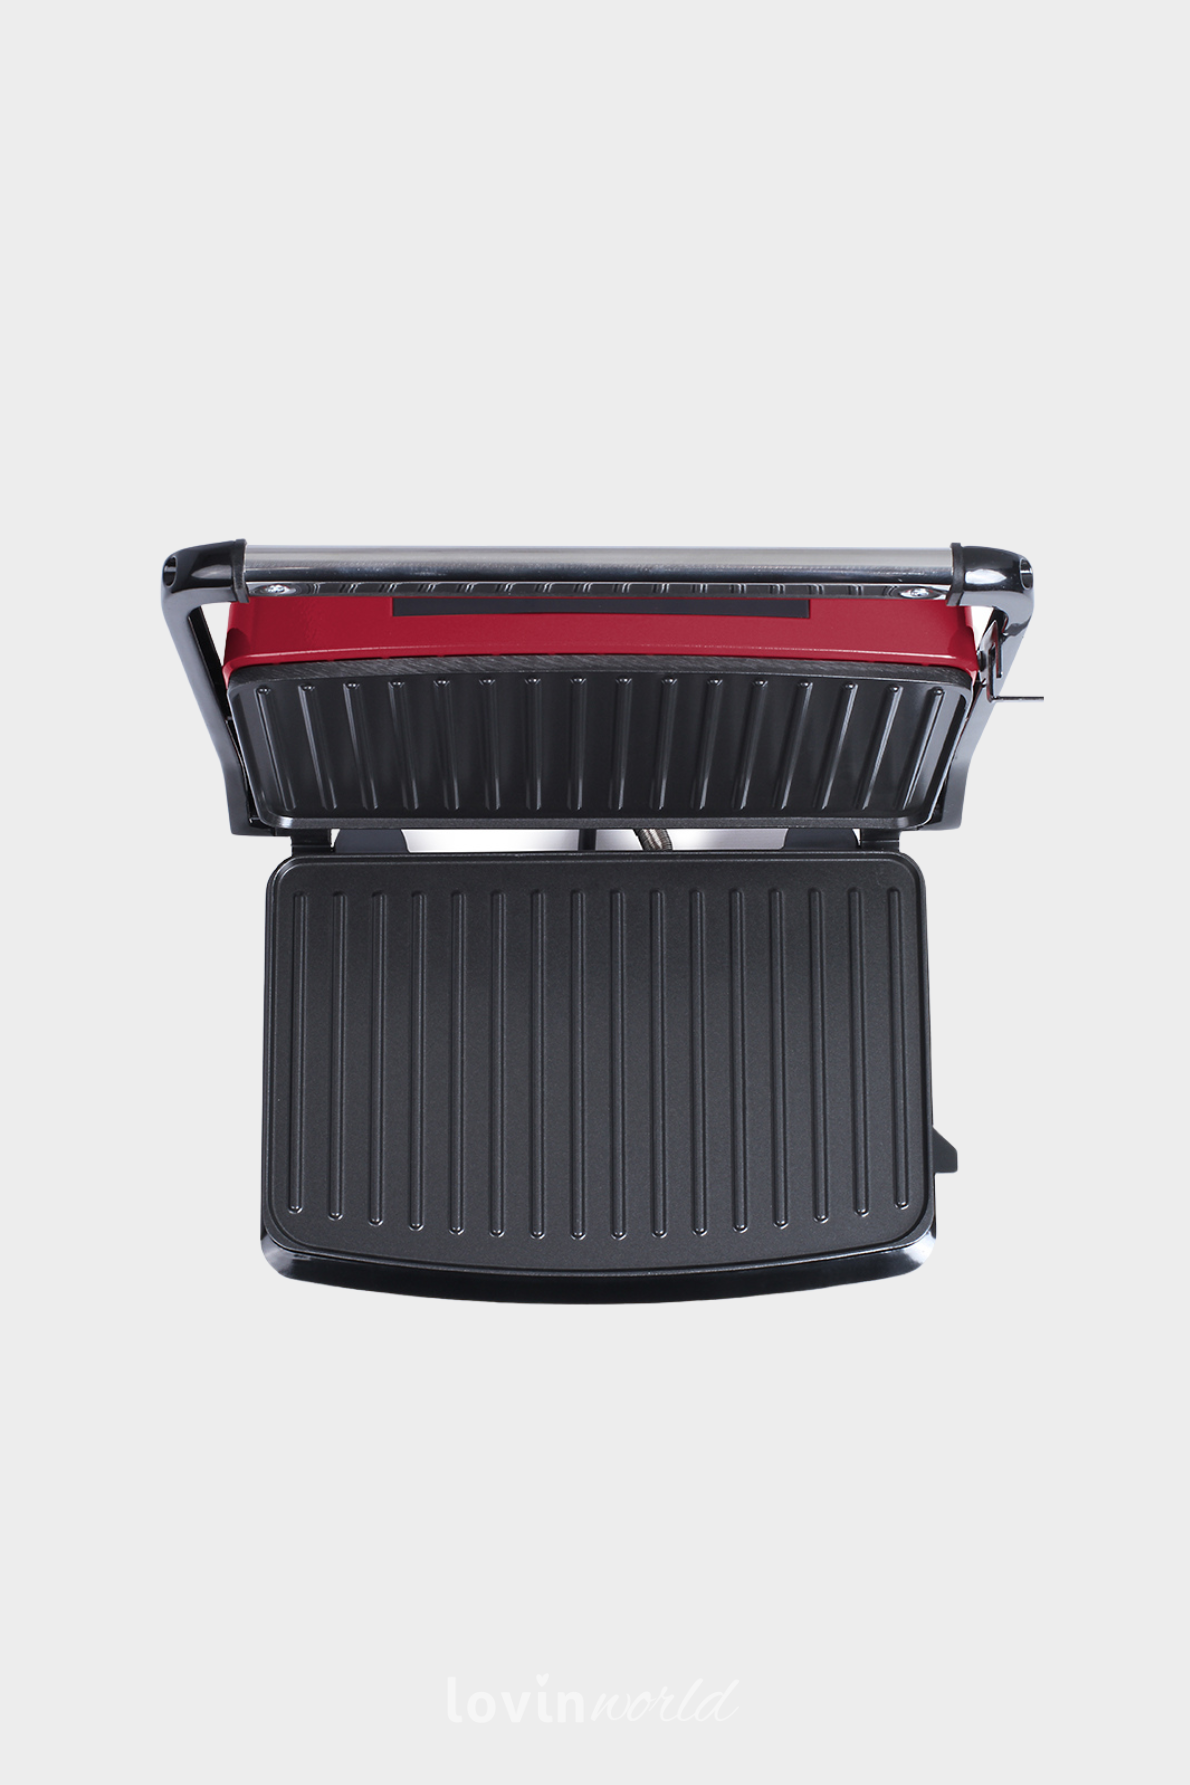 Contact Grill DOC232R in colore rosso-4